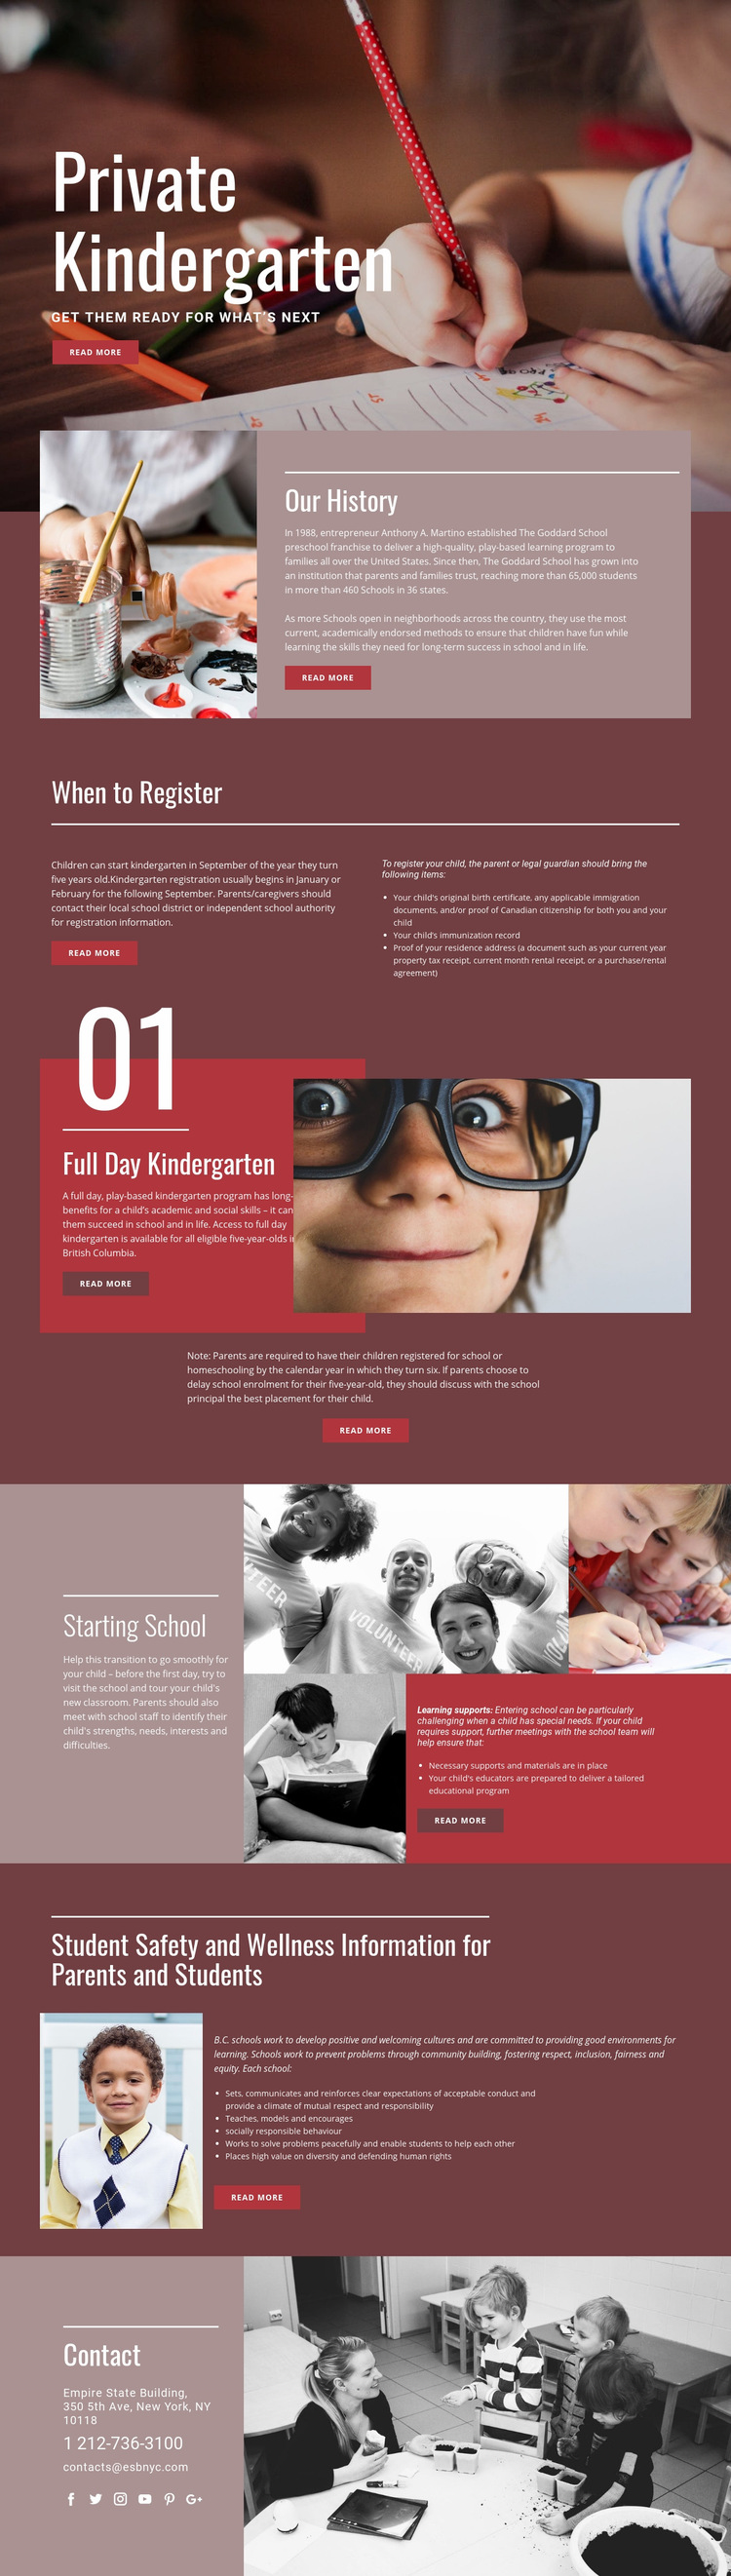 Private elementary education Web Page Design